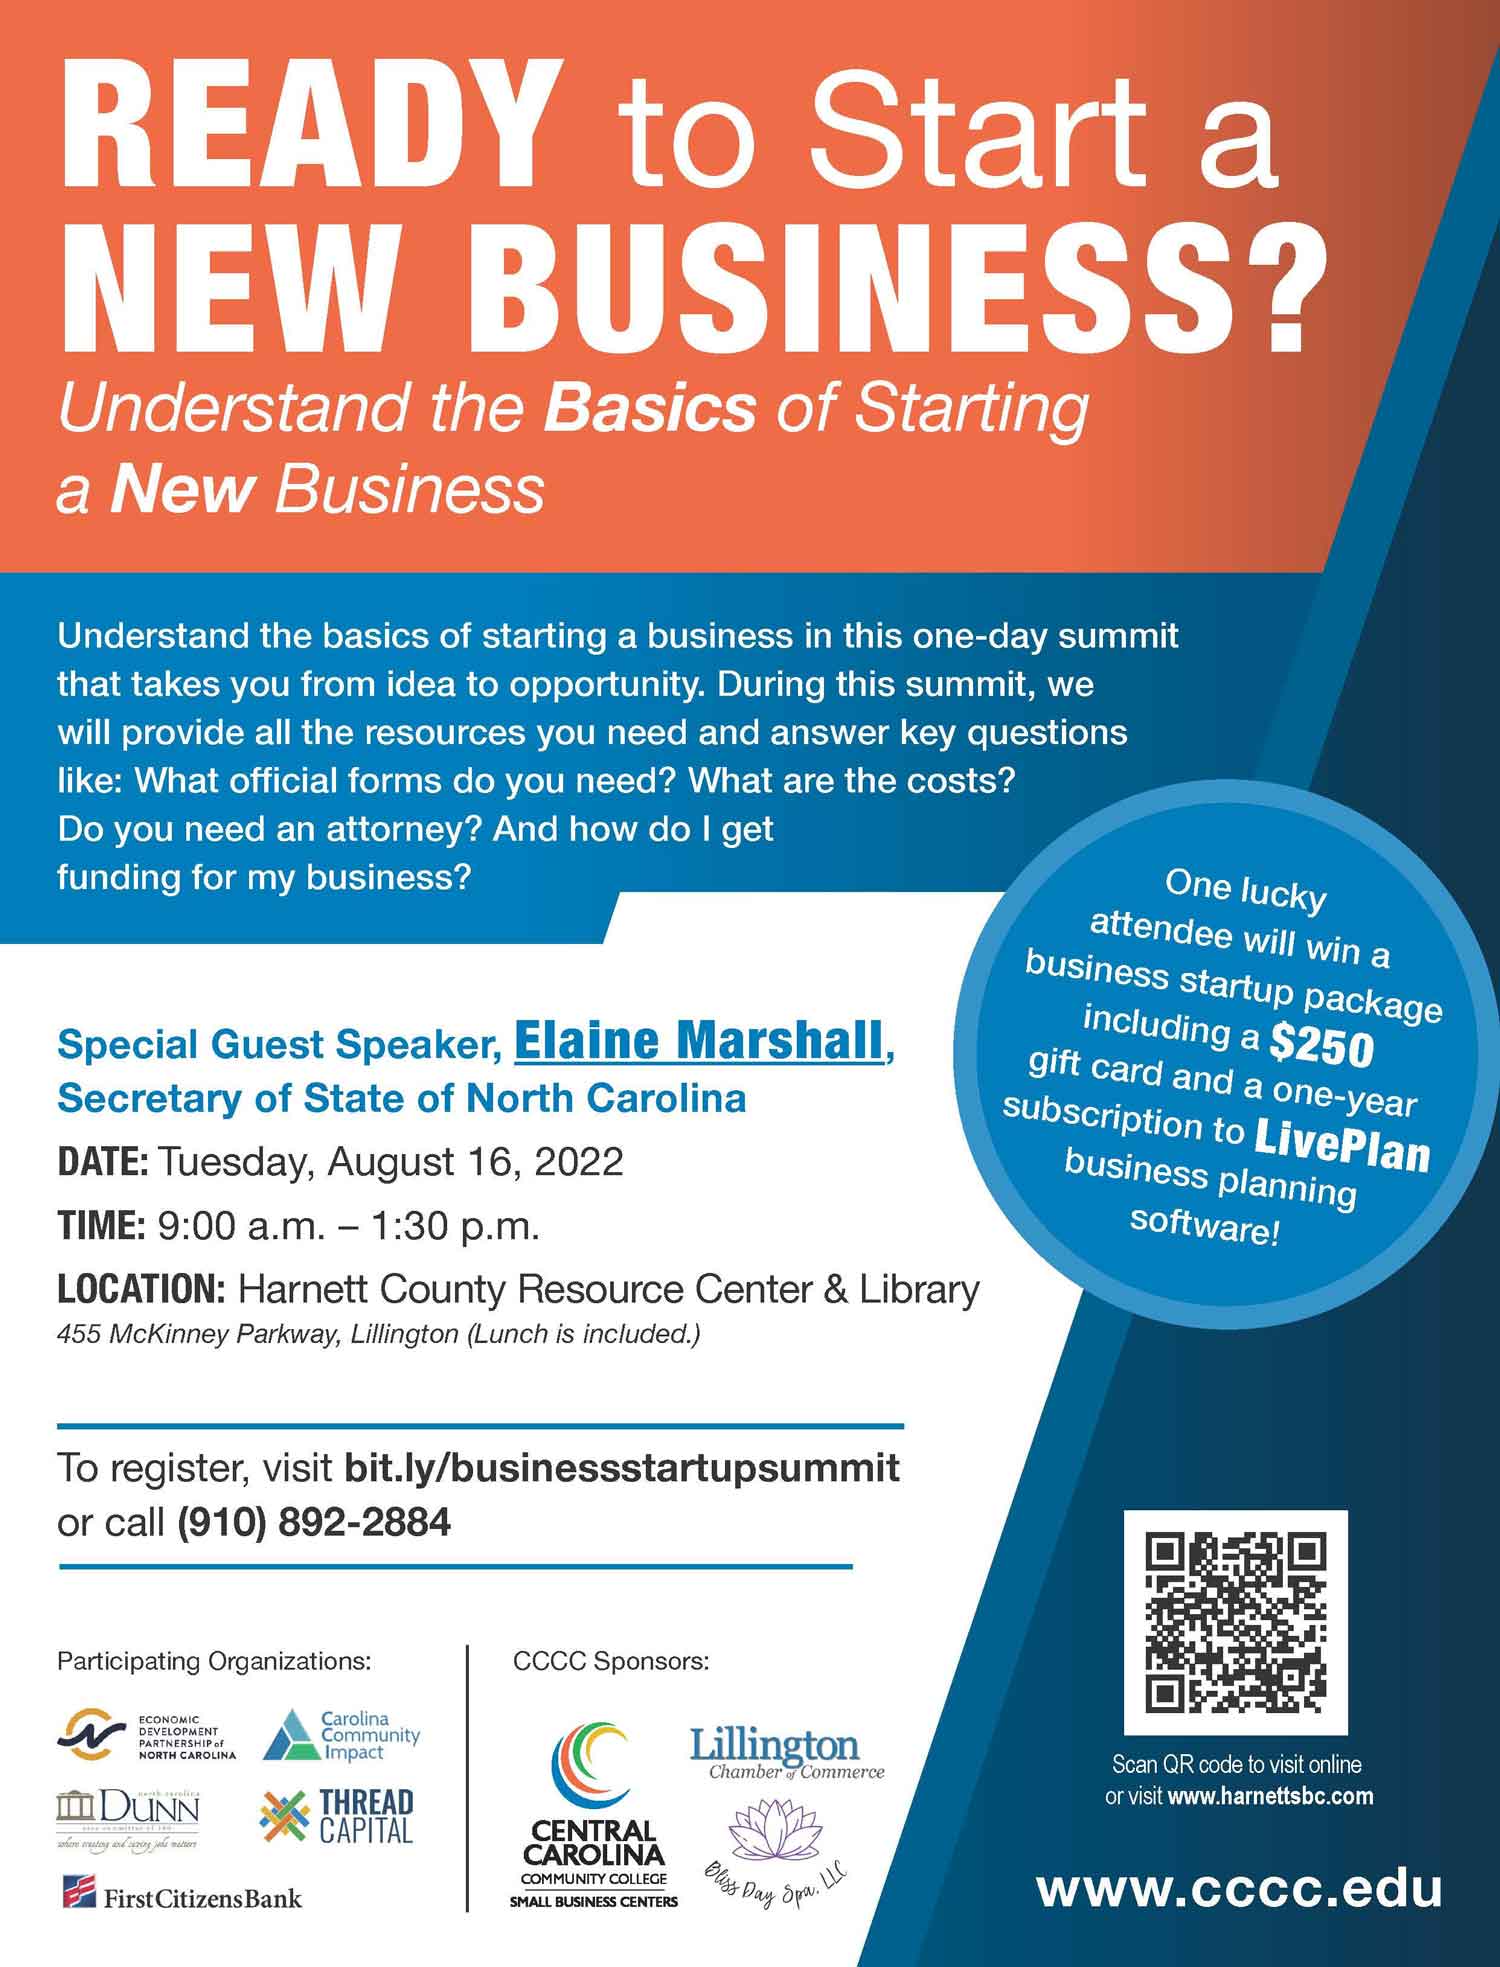 Read the full story, Business Startup Summit to take place on Aug. 16th in Lillington